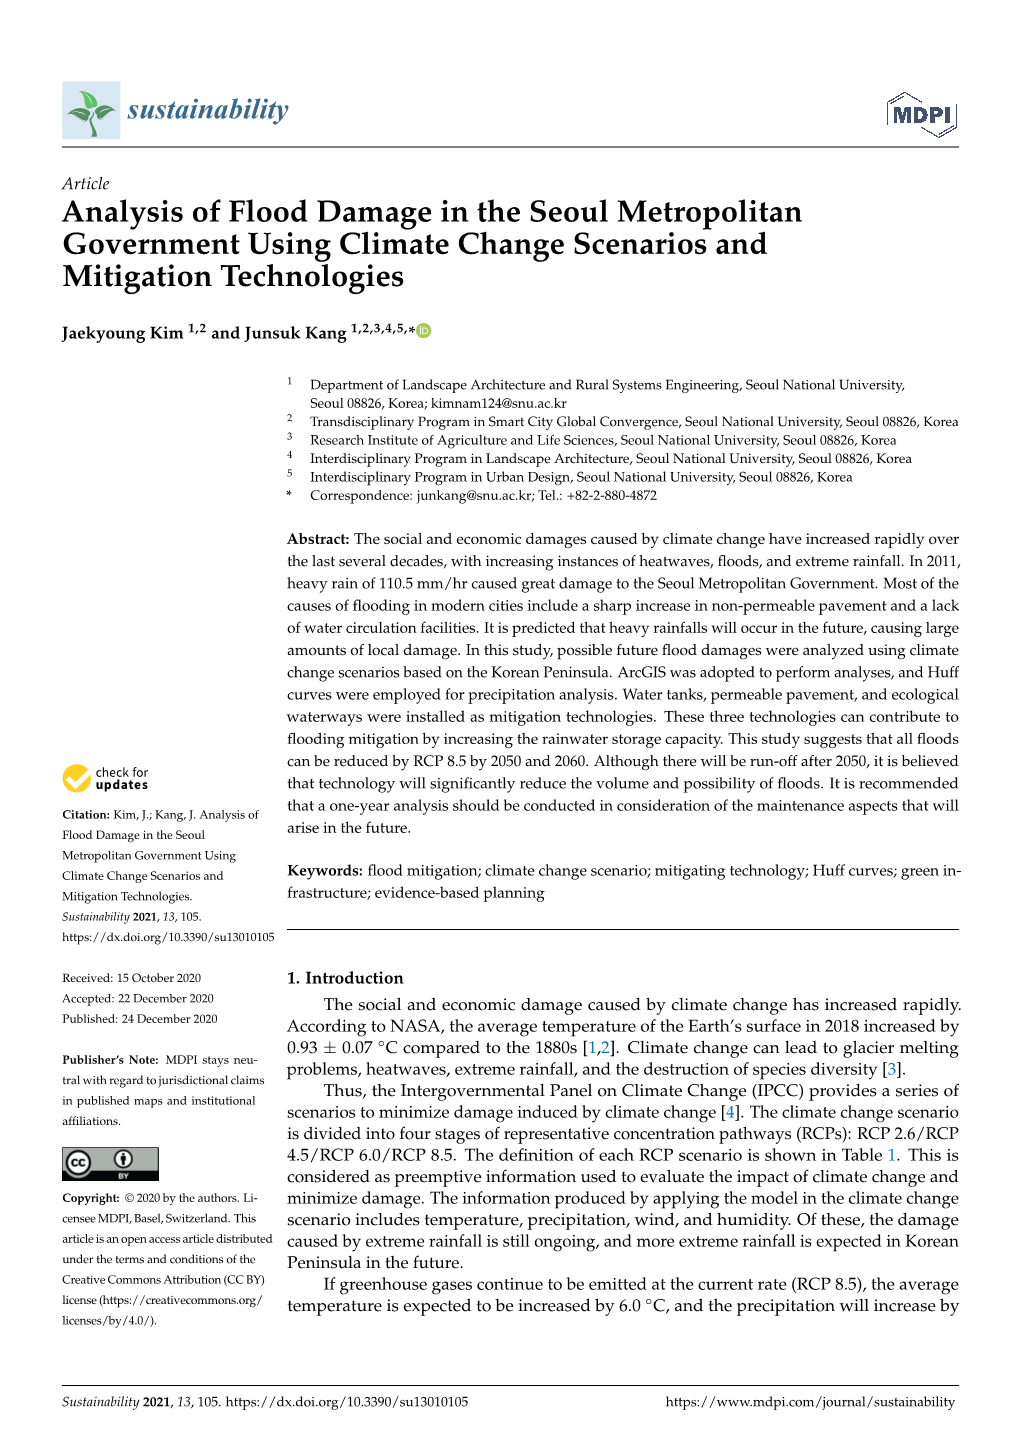 Analysis of Flood Damage in the Seoul Metropolitan Government Using Climate Change Scenarios and Mitigation Technologies